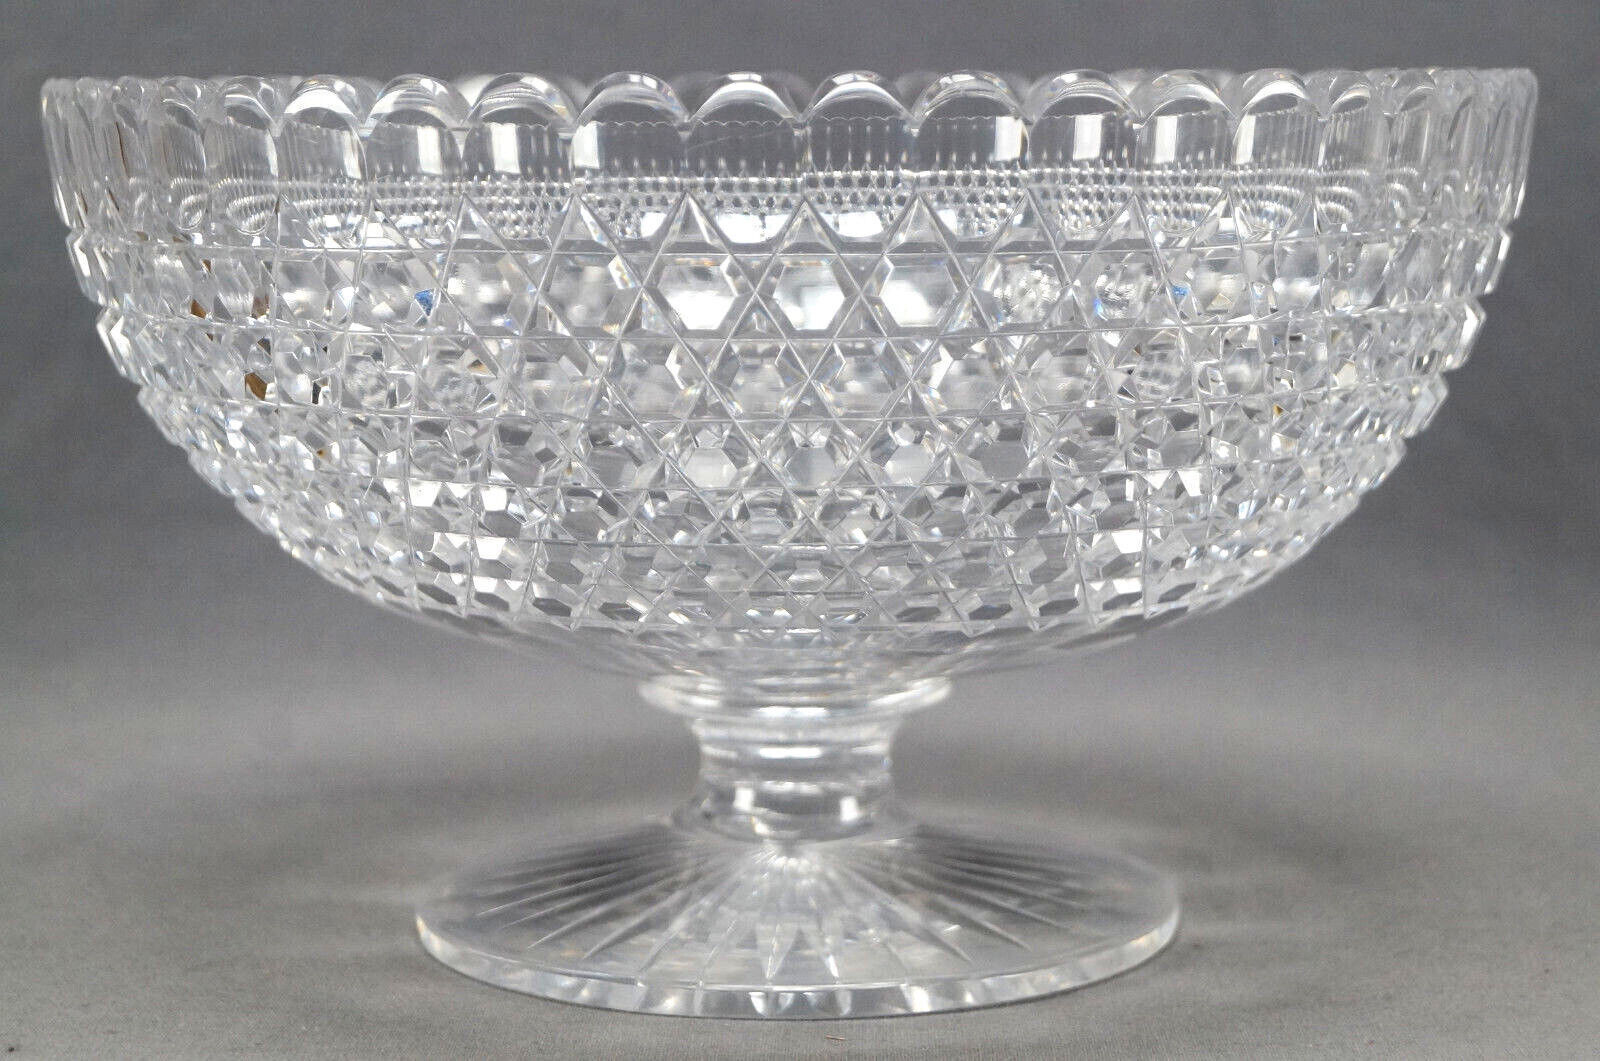 ABP American Brilliant Period Large 9 Inch Cut Glass Hob Diamond Footed Bowl